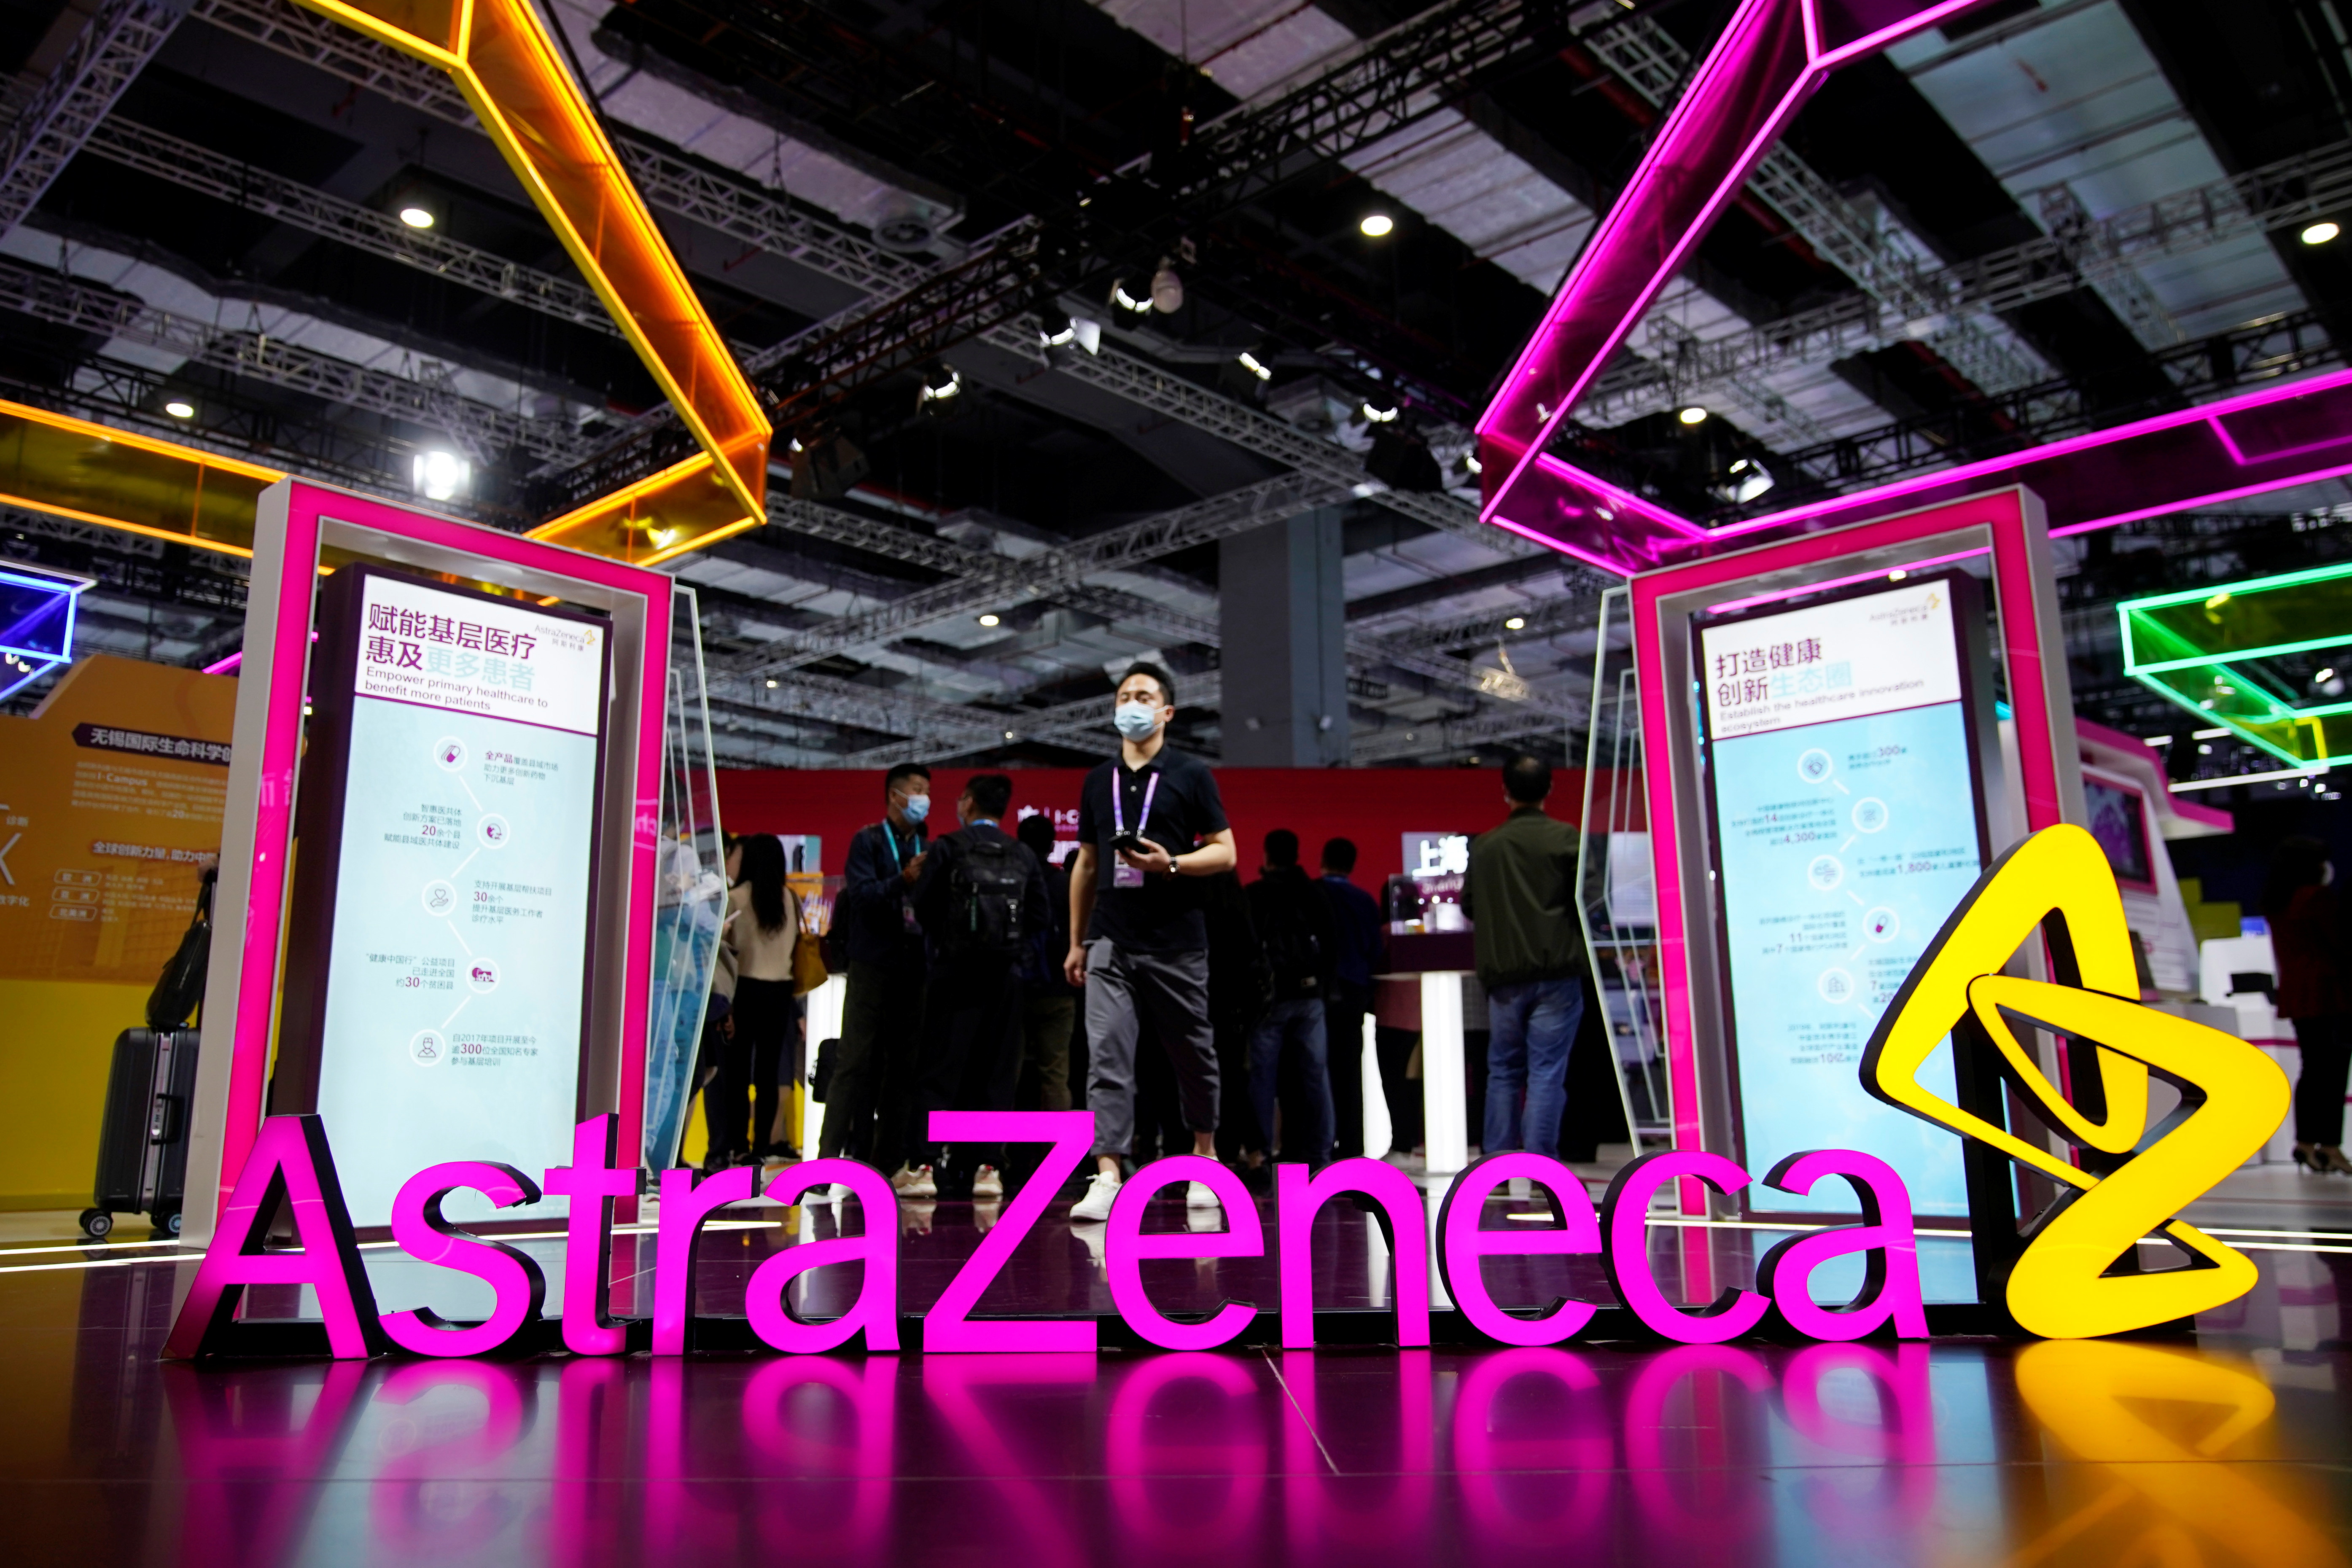 An AstraZeneca sign is seen at the third China International Import Expo (CIIE) in Shanghai